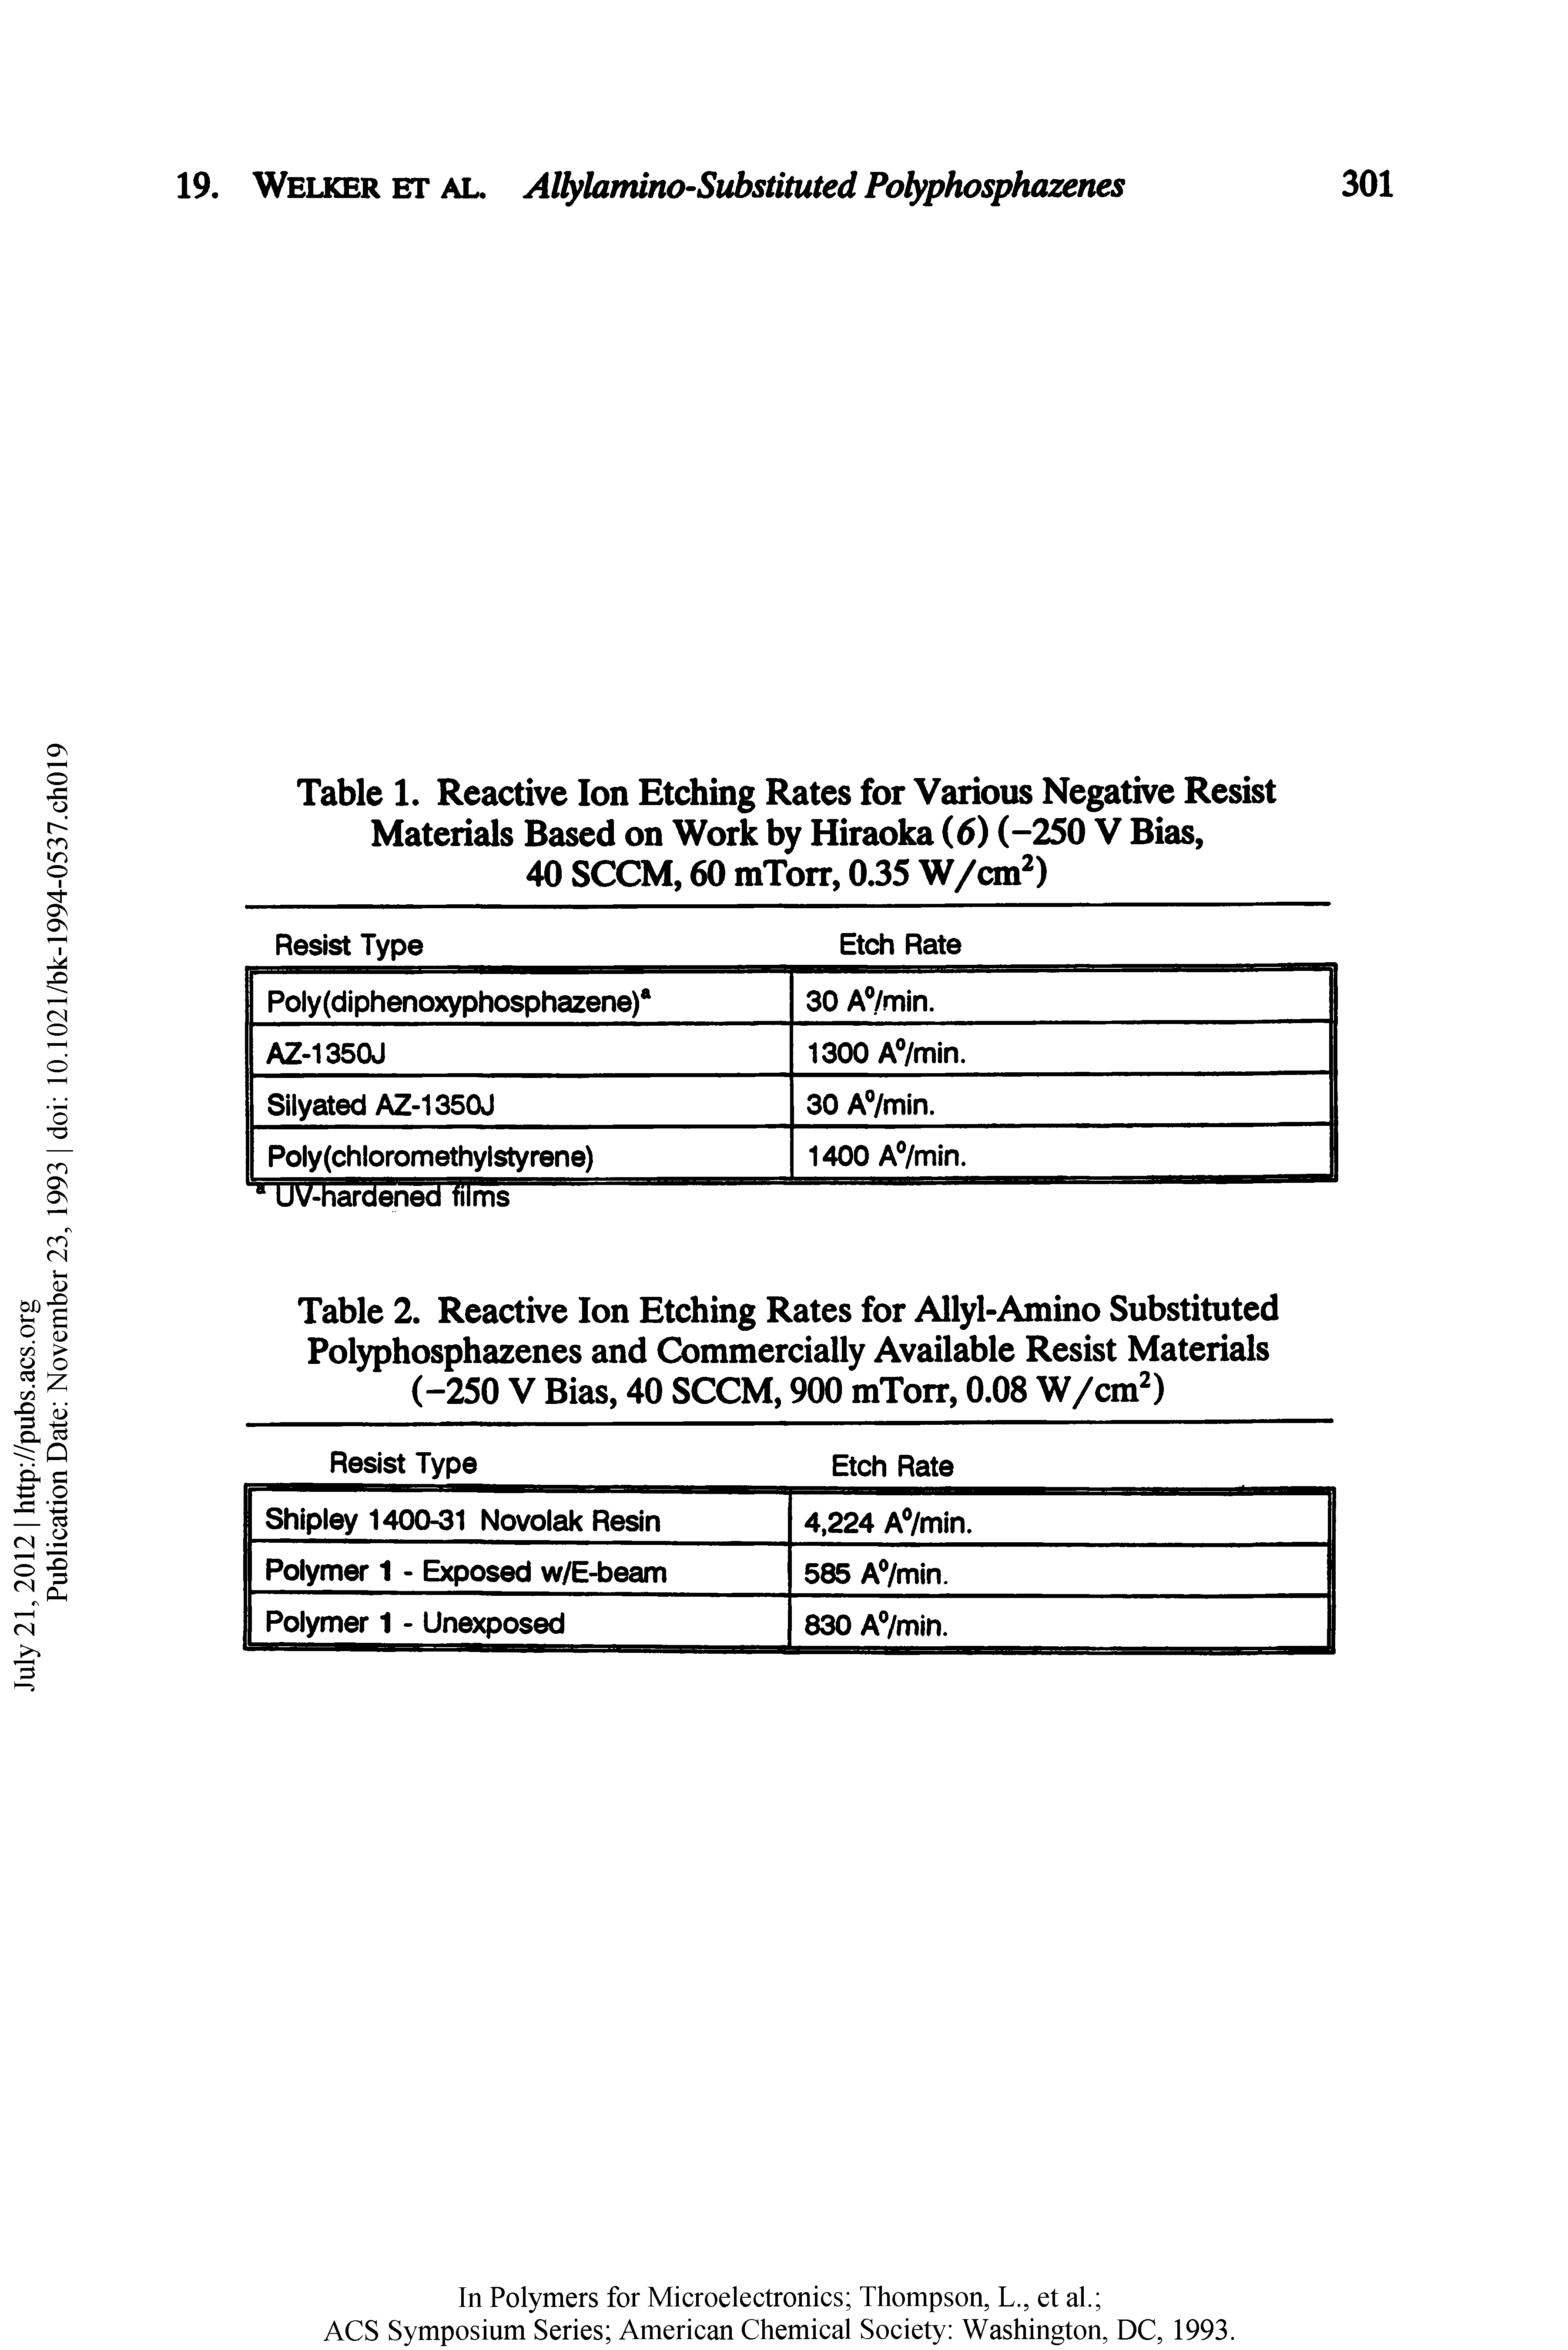 Table 2. Reactive Ion Etching Rates for Allyl-Amino Substituted Polyphosphazenes and Commercially Available Resist Materials (-250 V Bias, 40 SCCM, 900 mTorr, 0.08 W/cm )...